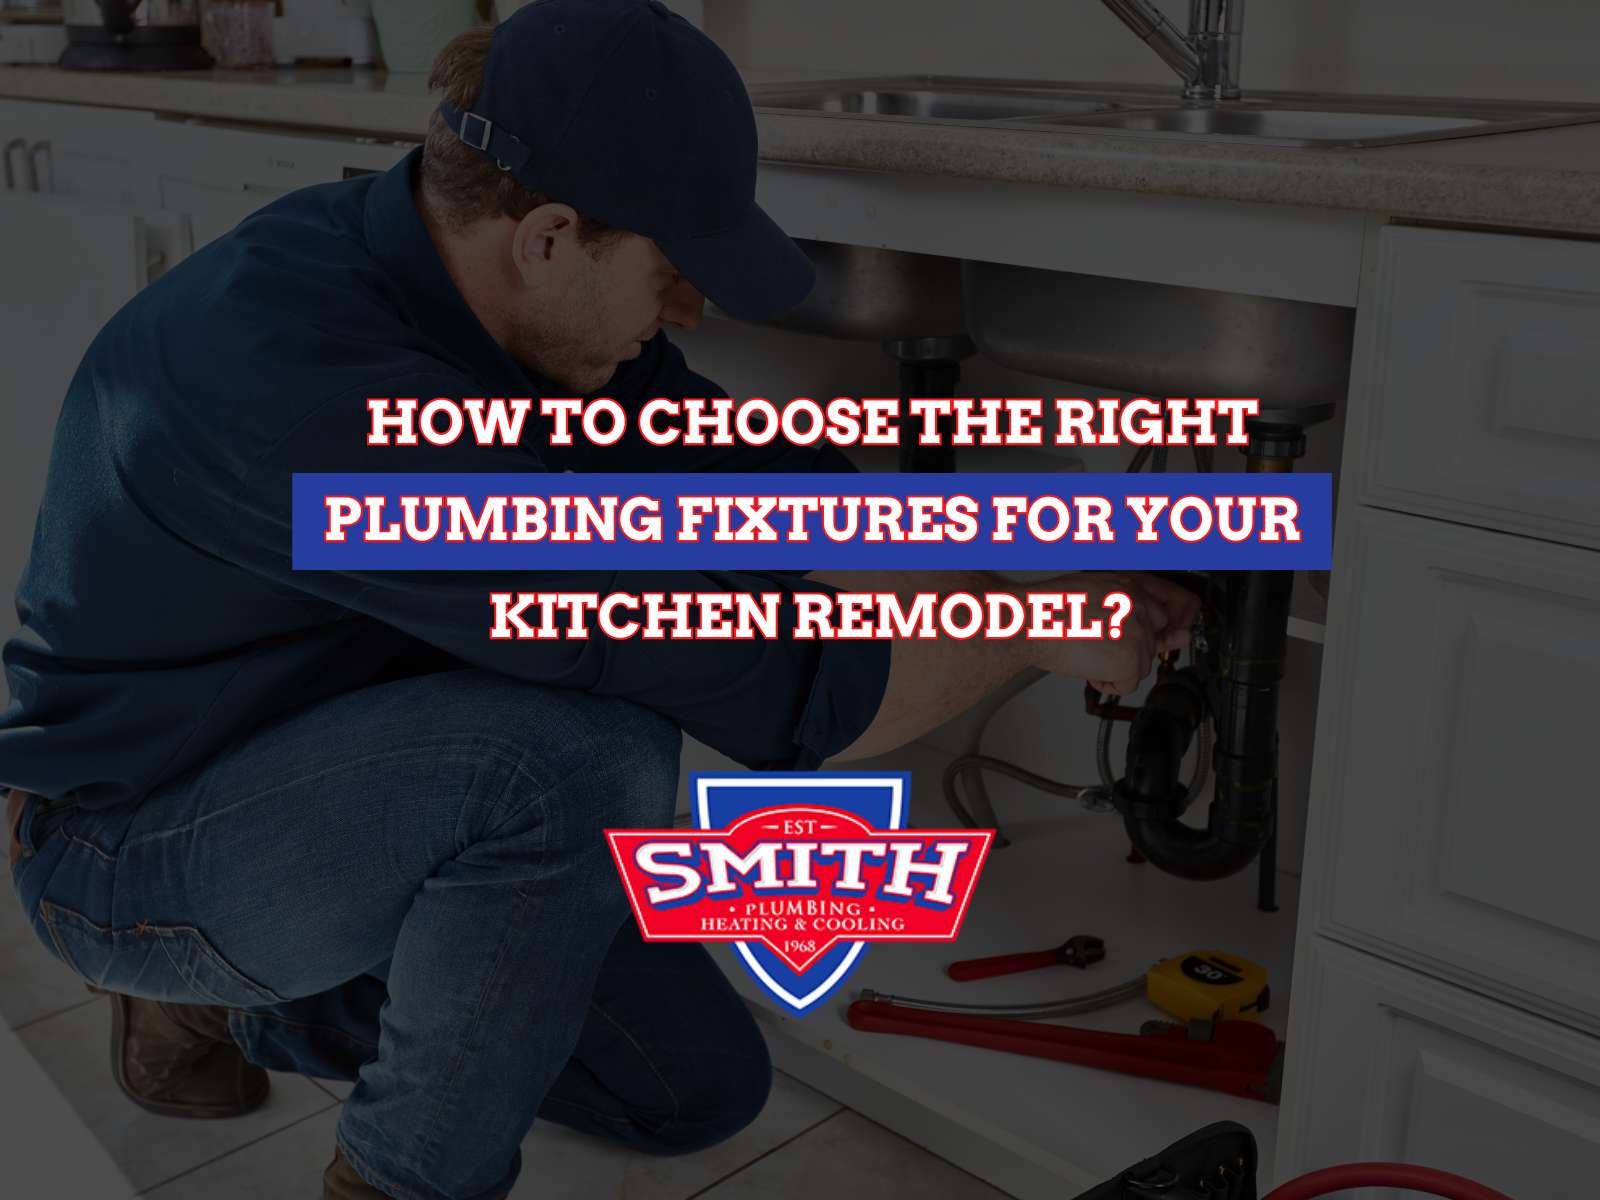 How To Choose The Right Plumbing Fixtures For Your Kitchen Remodel